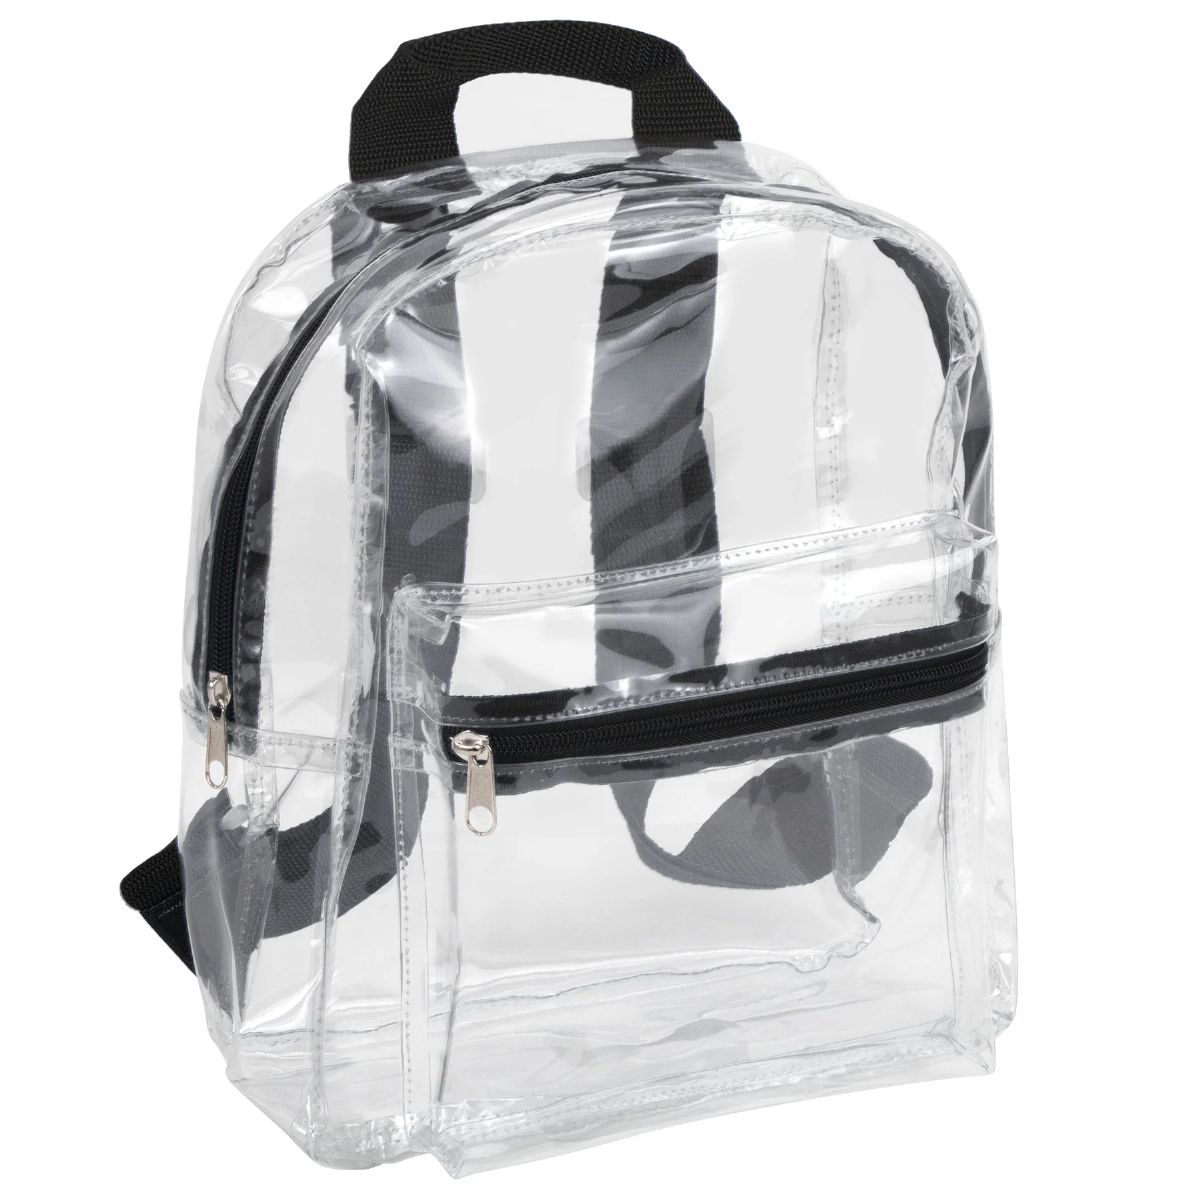 24 Pieces of Mini 12 Inch Clear Backpack - Single Colors